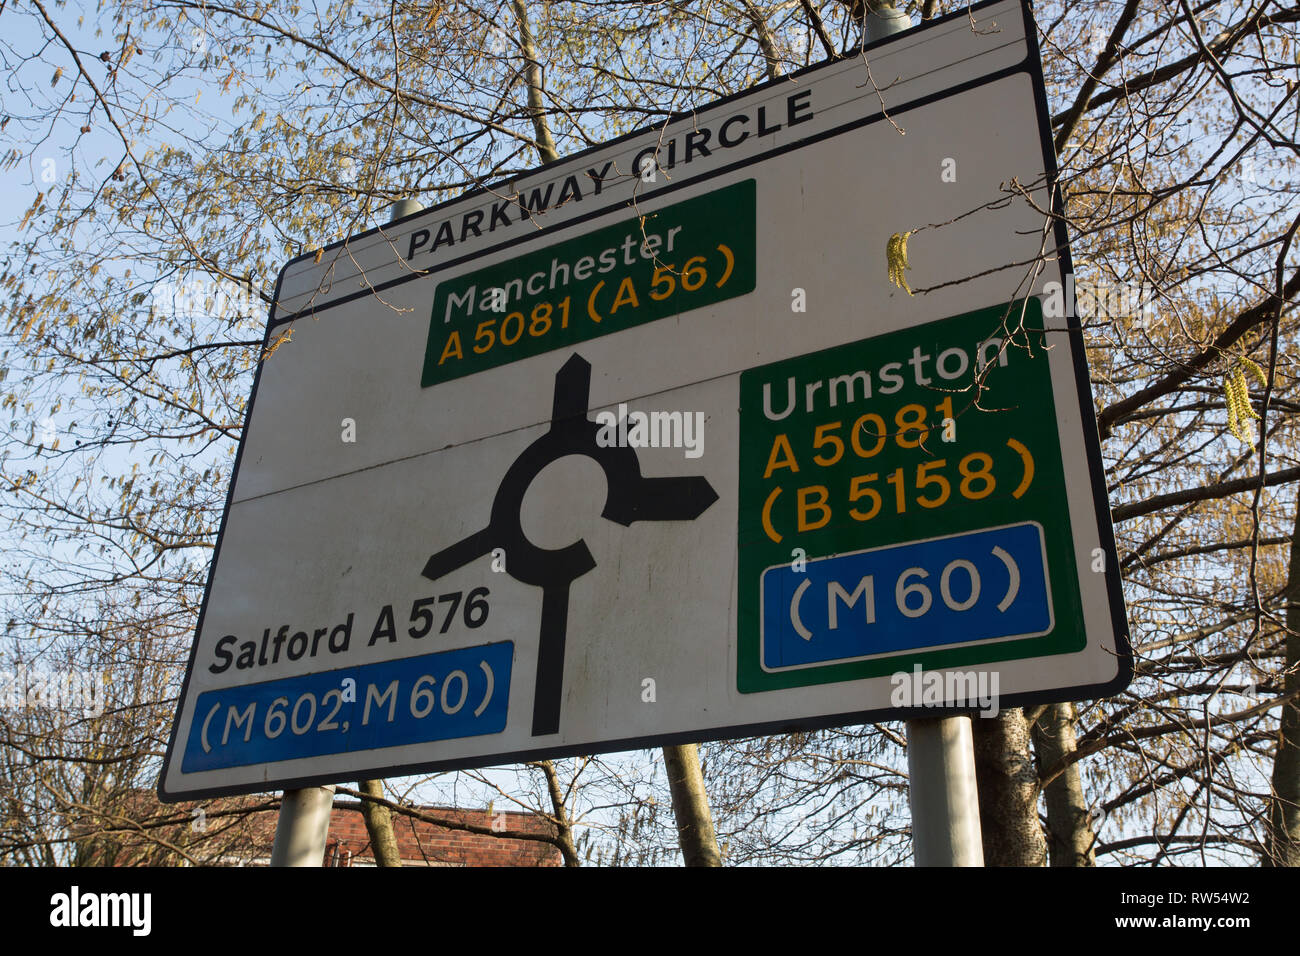 Road sign at Parkway Circle, Trafford Park, Greater Manchester Stock Photo